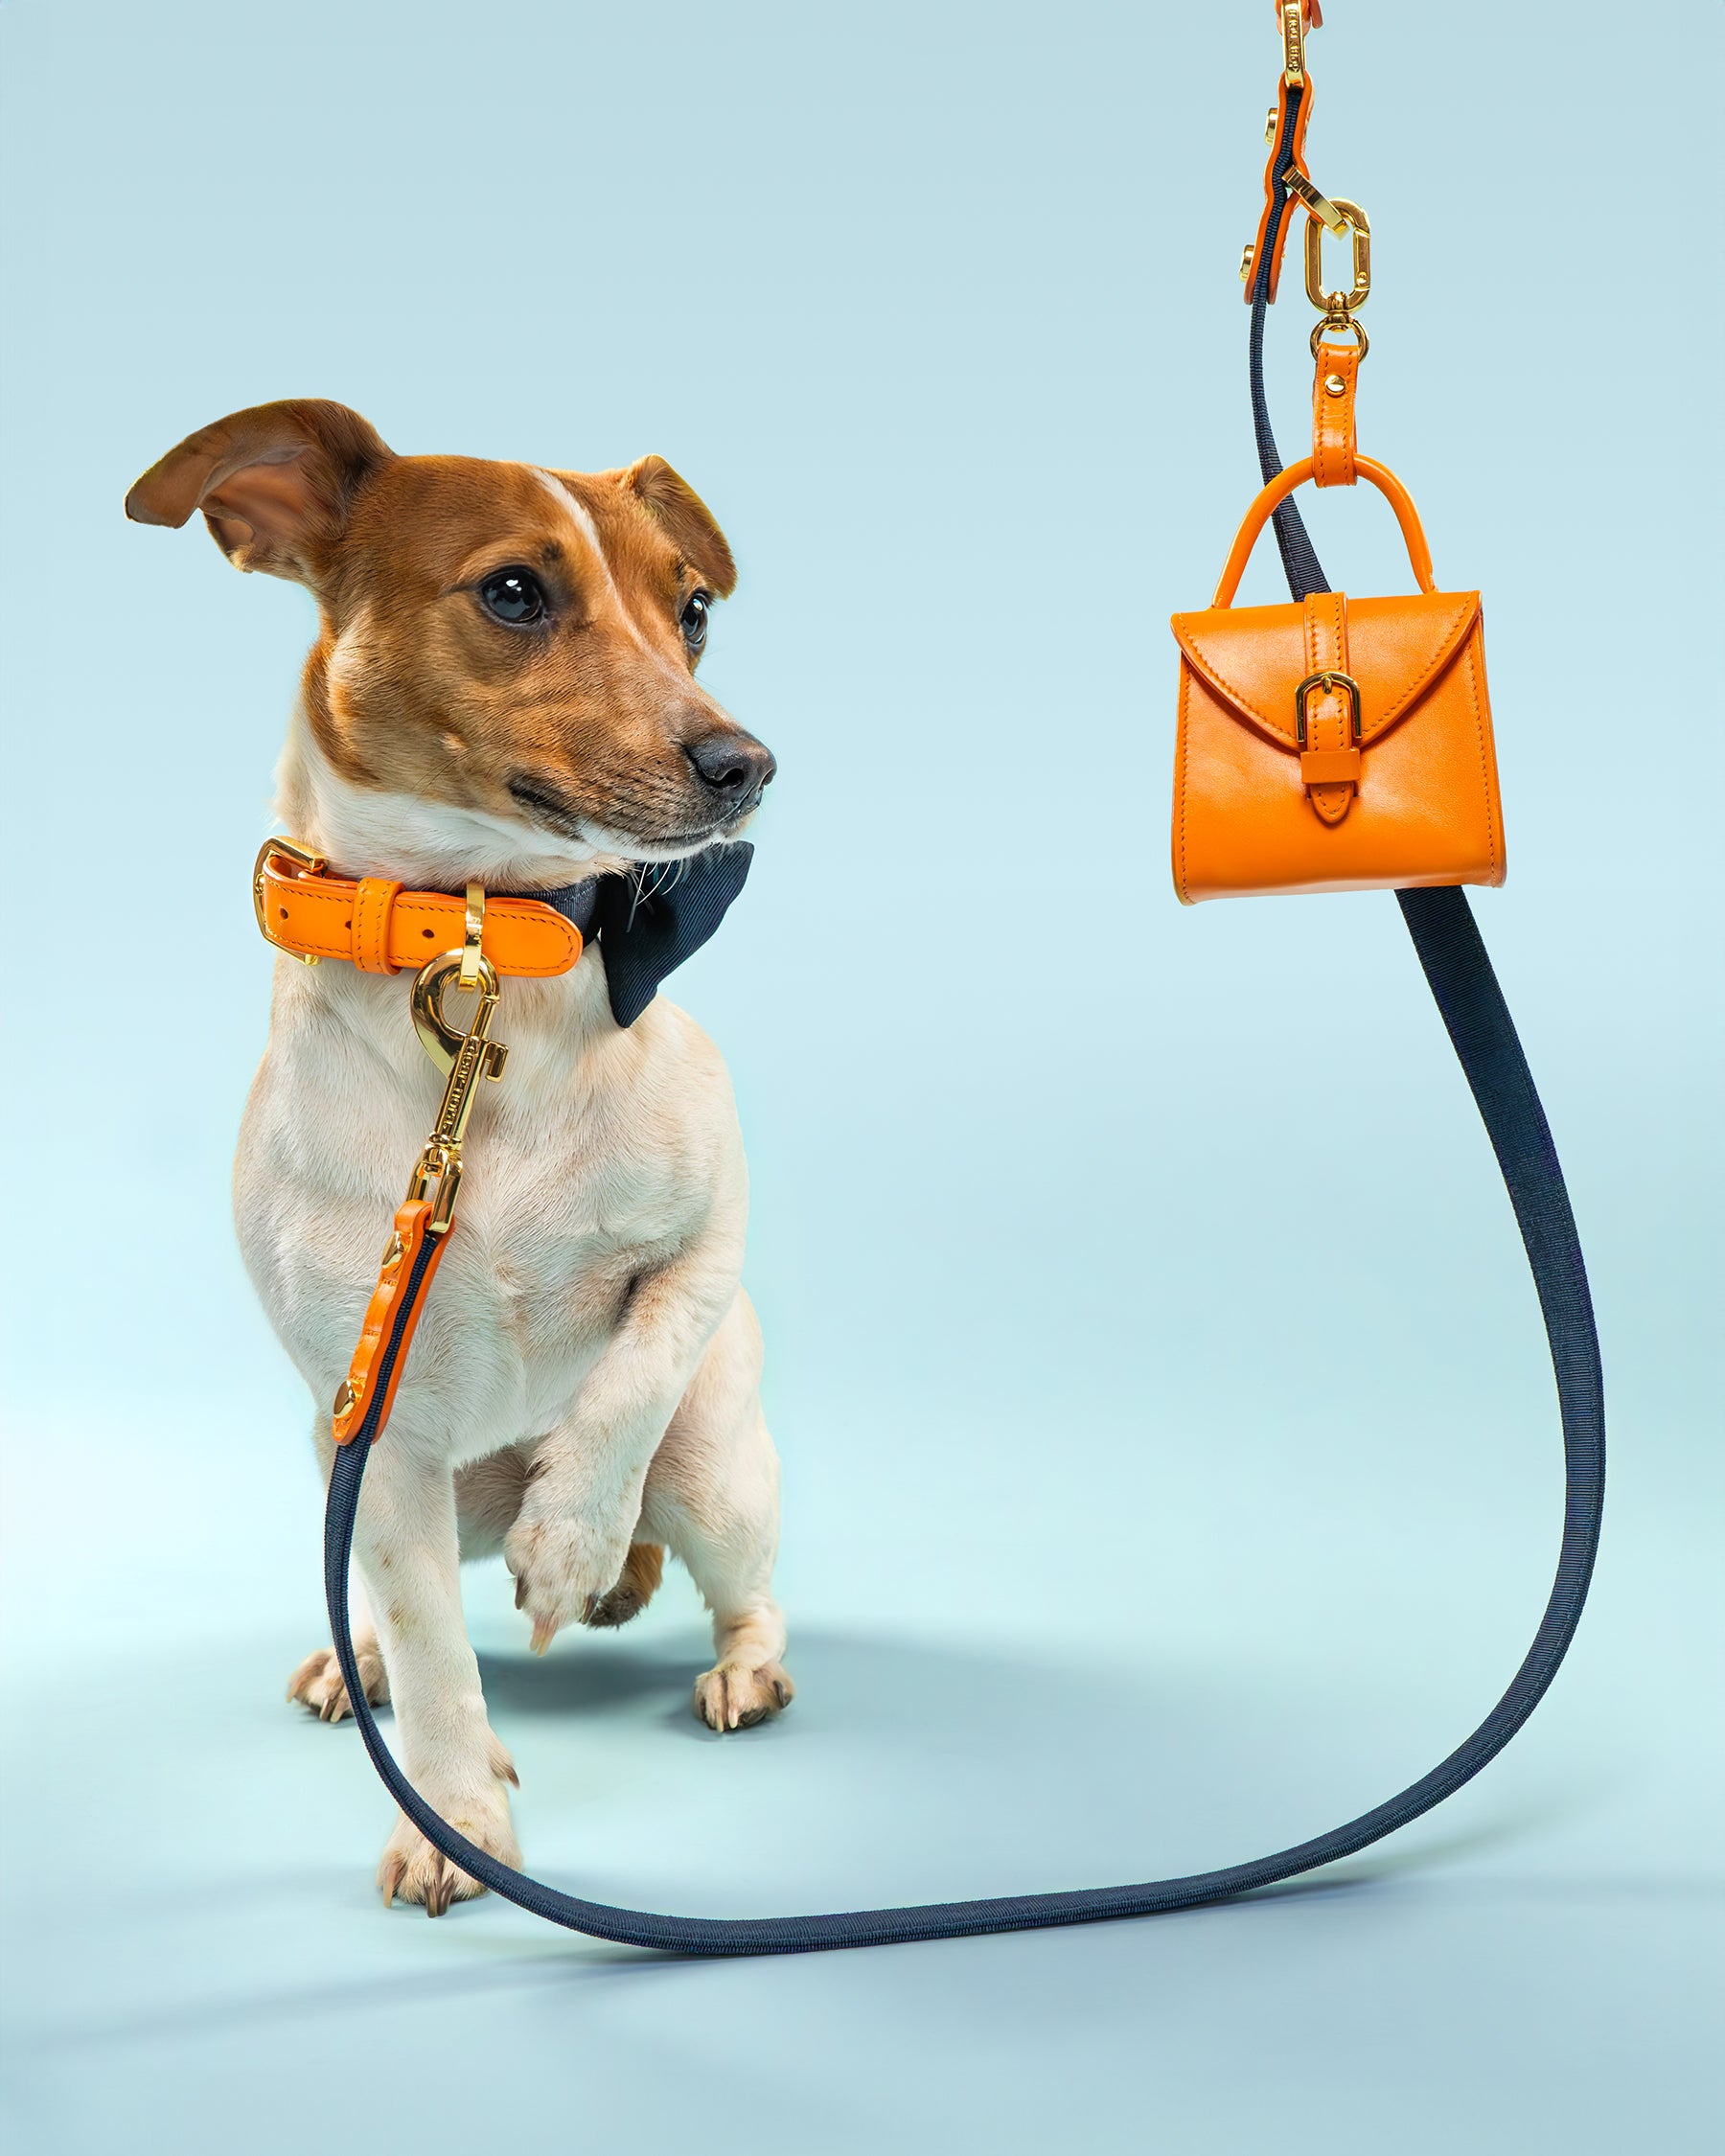 Jack Russel modelling a Dear Nora Tangerine dog accessories set, blue background - orange leather and navy blue fabric - collar, leash, poop bag holder and bow